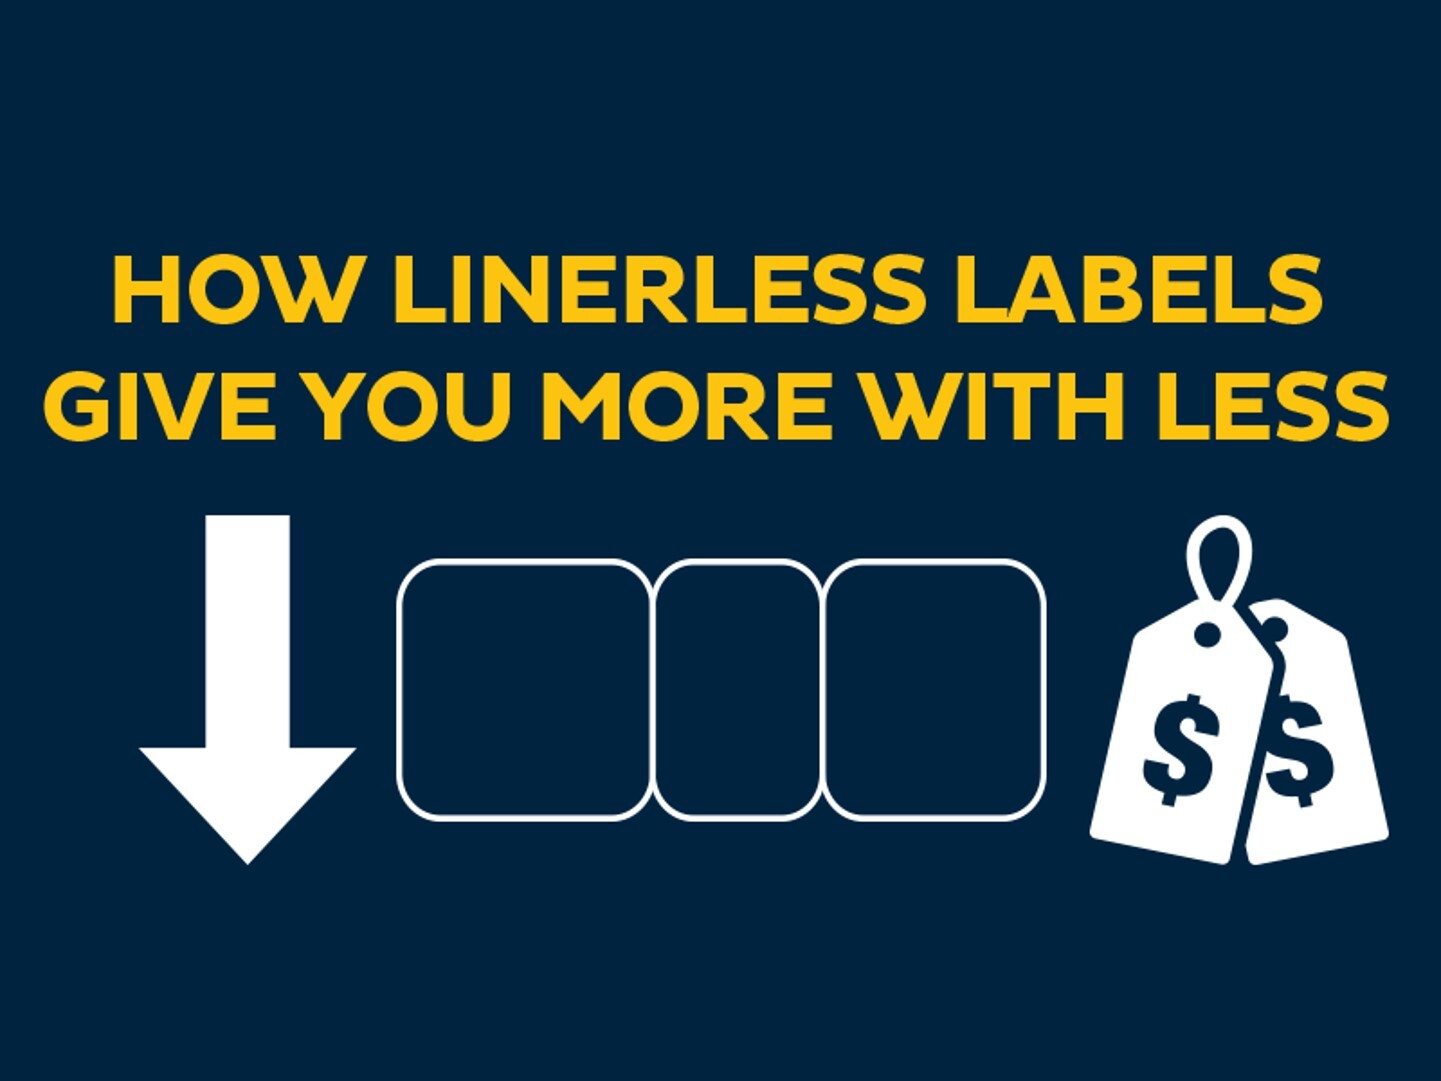 linerless labels_more with less.jpg